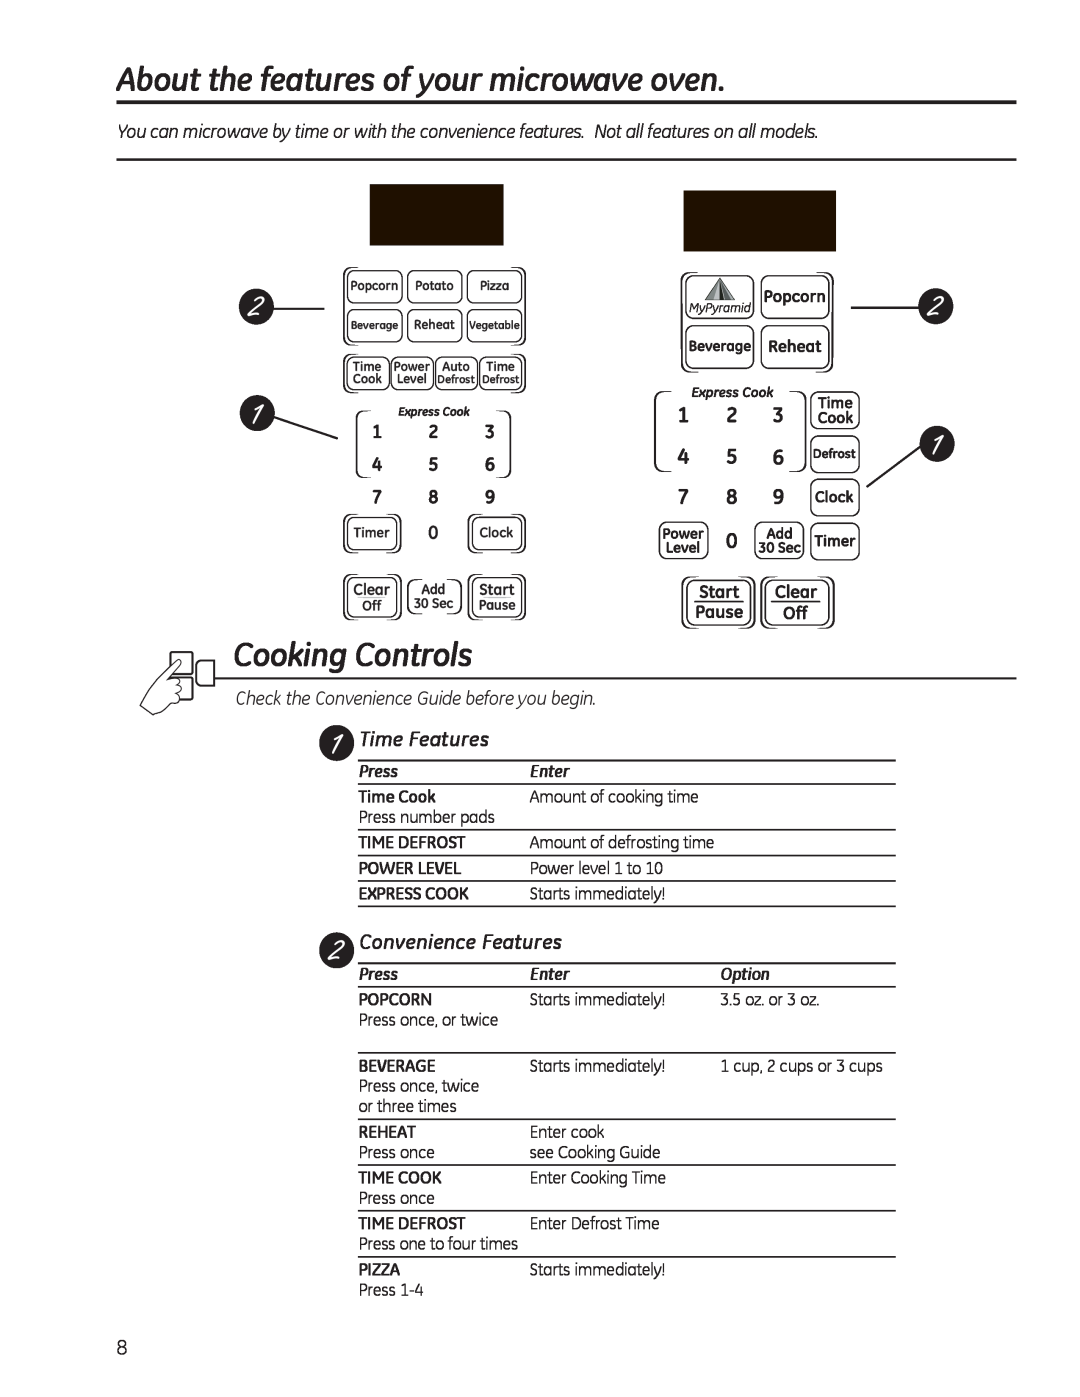 GE JES1142 Cooking Controls, About the features of your microwave oven, 23 56, Enter, Time Cook, Press number pads 